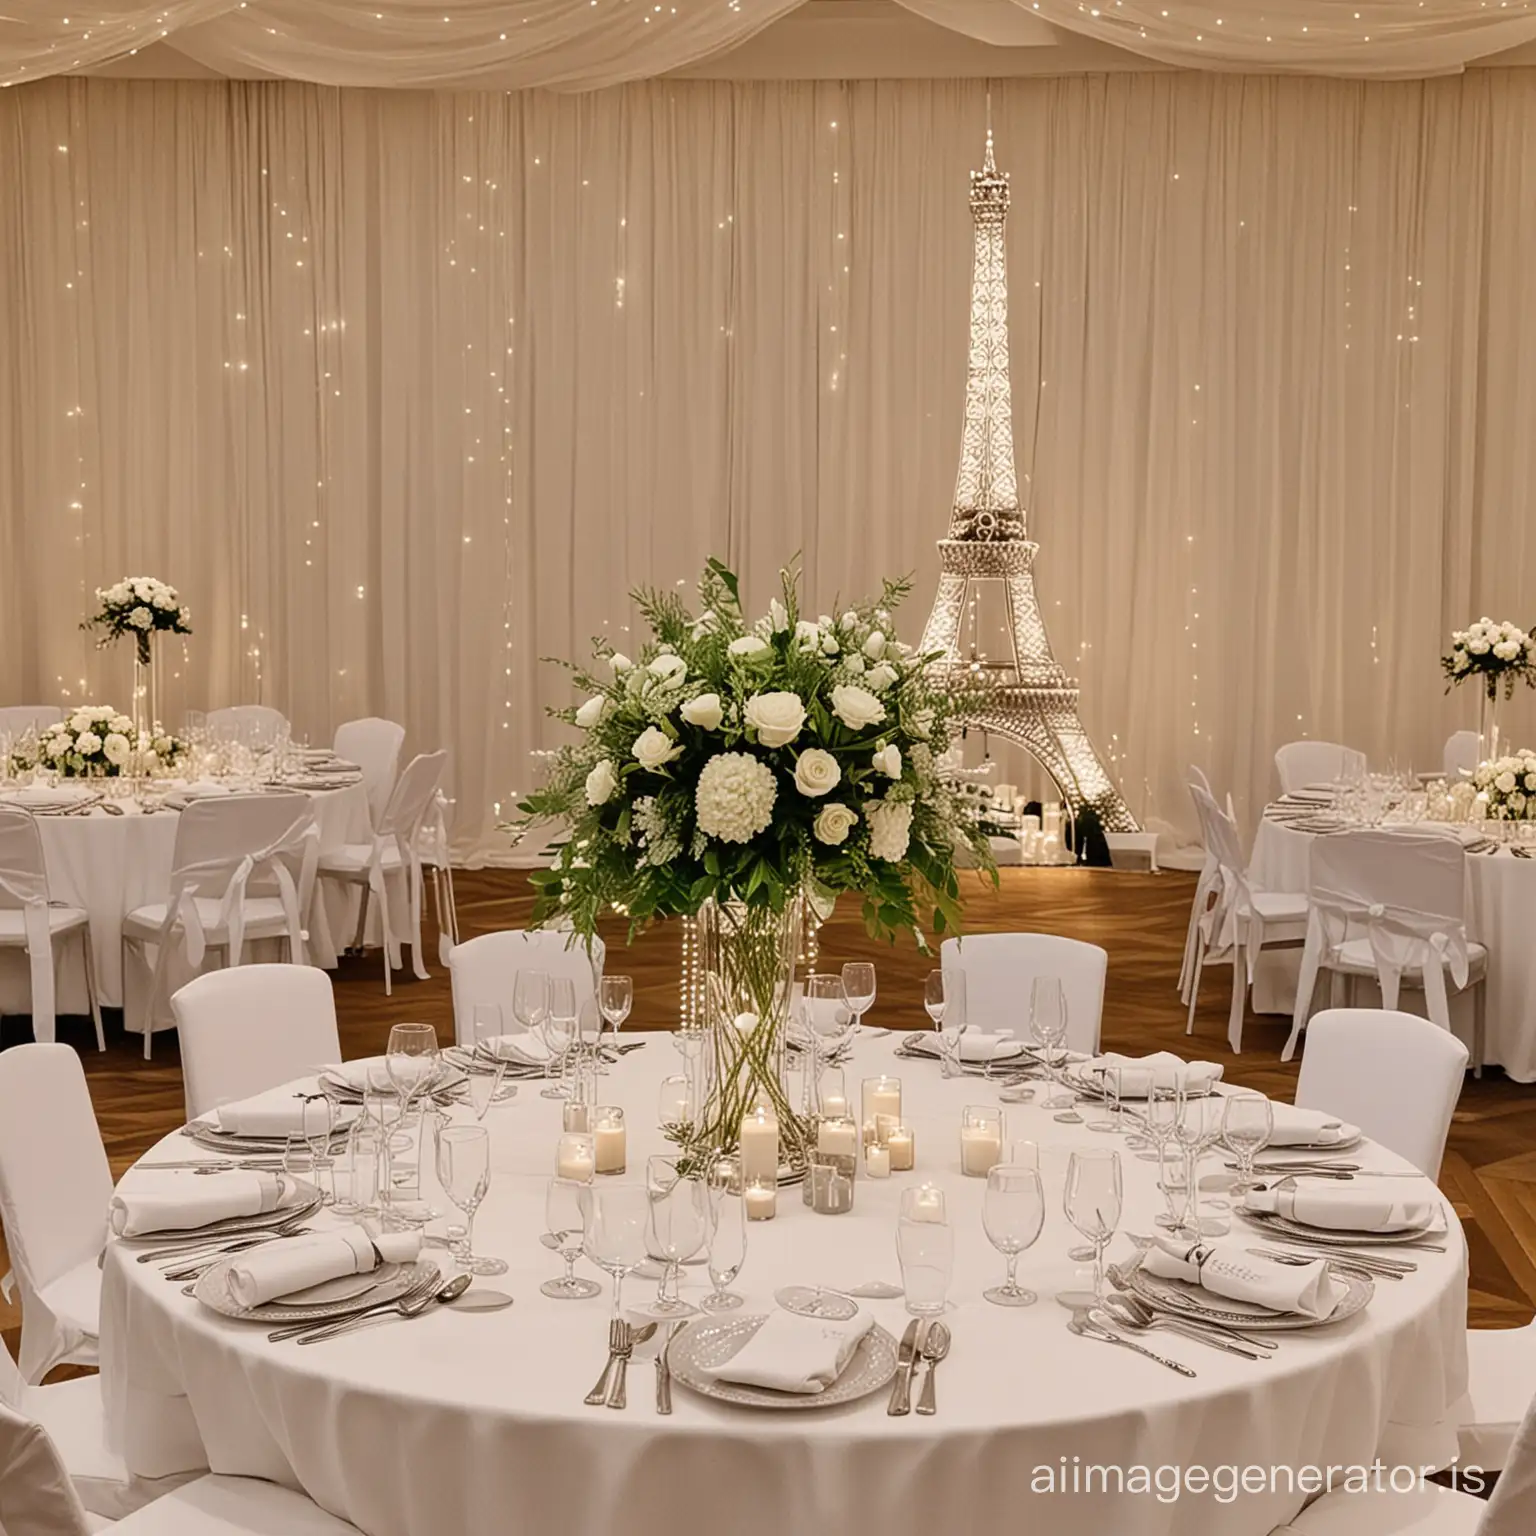 a round wedding table set up with a white tablecloth and a white eiffel tower vase illuminated with fairy lights